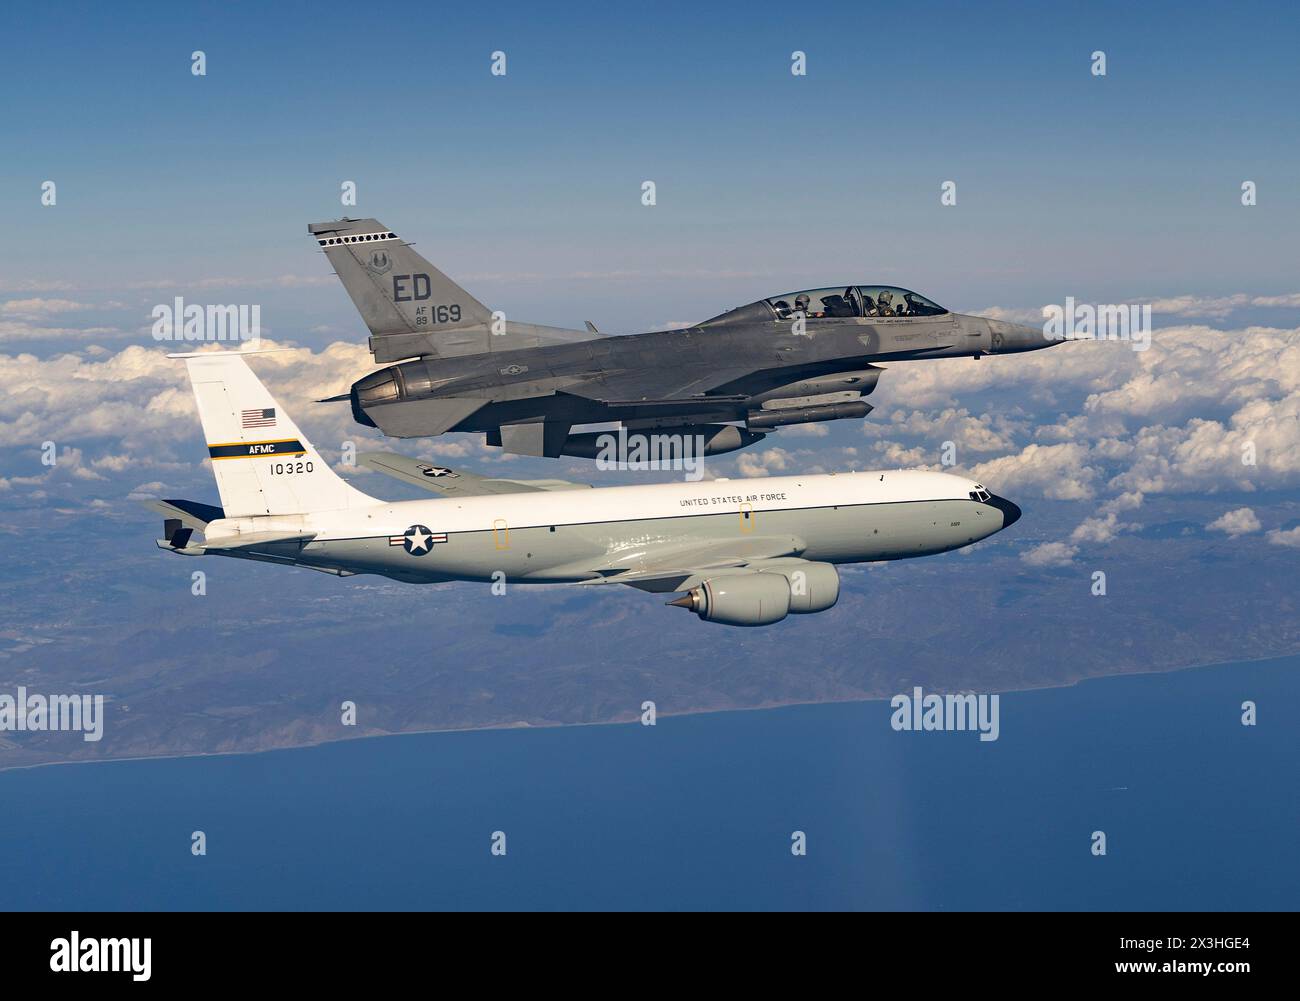 Edwards Air Force Base, United States. 07 November, 2023. A U.S Air Force F-16D Fighting Falcon multirole fighter aircraft with the Skulls of the 416th Flight Test Squadron flies alongside a KC-135 Stratotanker refueling aircraft over Edwards Air Force Base, November 7, 2023 in Palmdale, California.  Credit: Bryce Bennett/U.S. Air Force/Alamy Live News Stock Photo